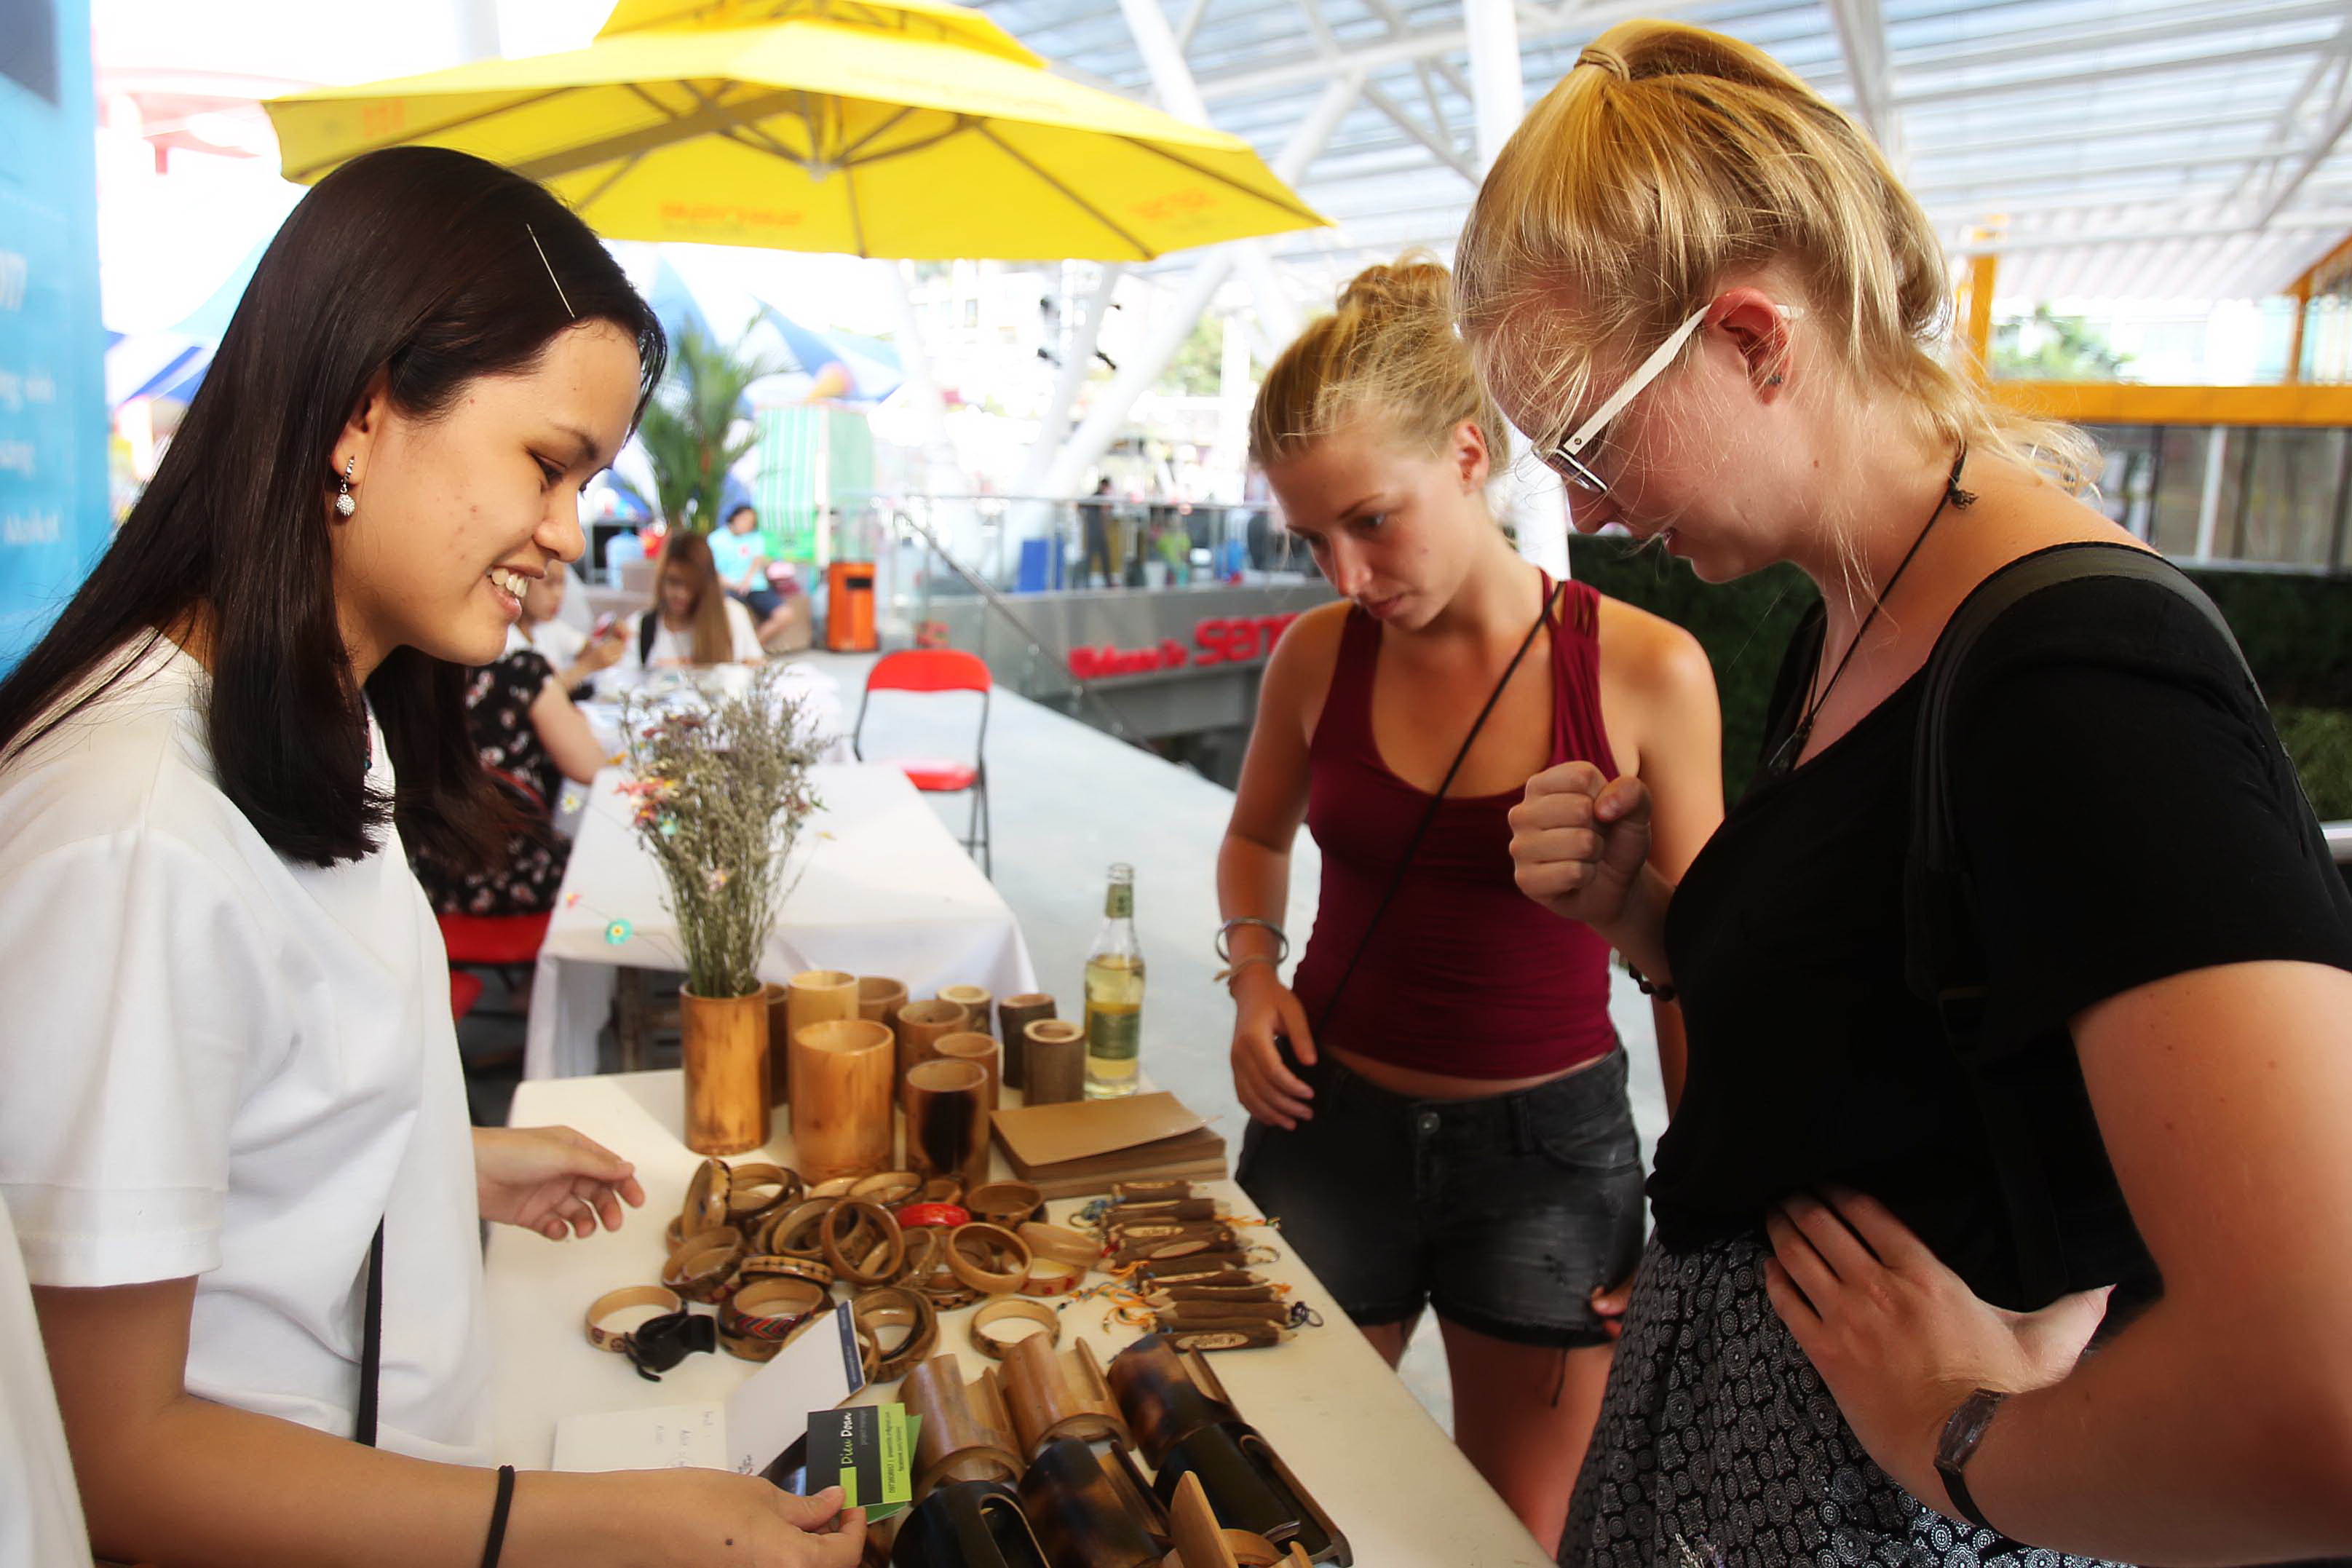 Visitors check out handicrafts sold at the underground trade area.